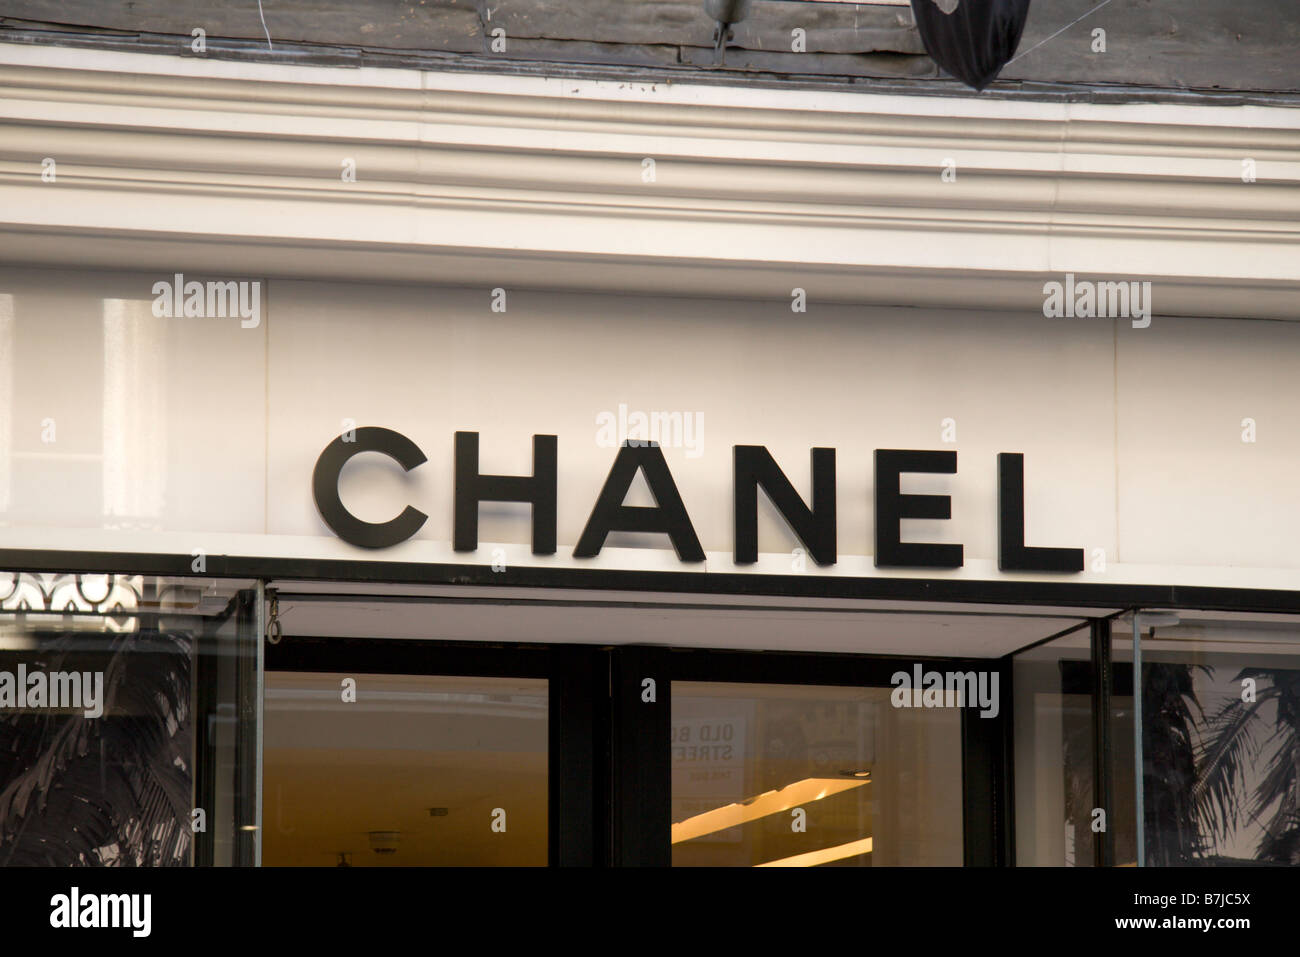 The shop brand of the Chanel perfume & fragrance shop on Old Bond Street, London. Jan 2009 Stock Photo